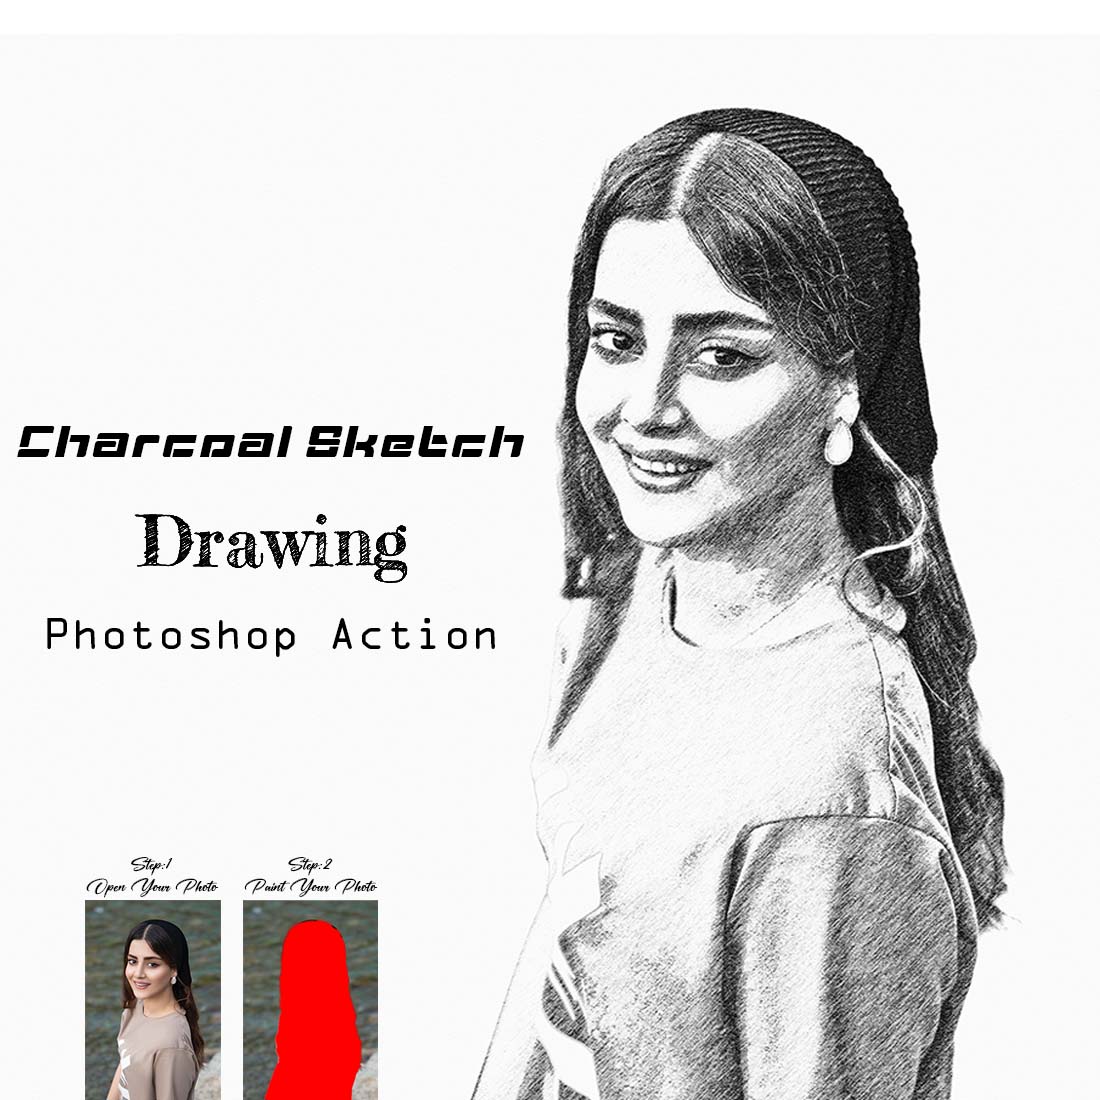 Charcoal Sketch Drawing Photoshop Action cover image.